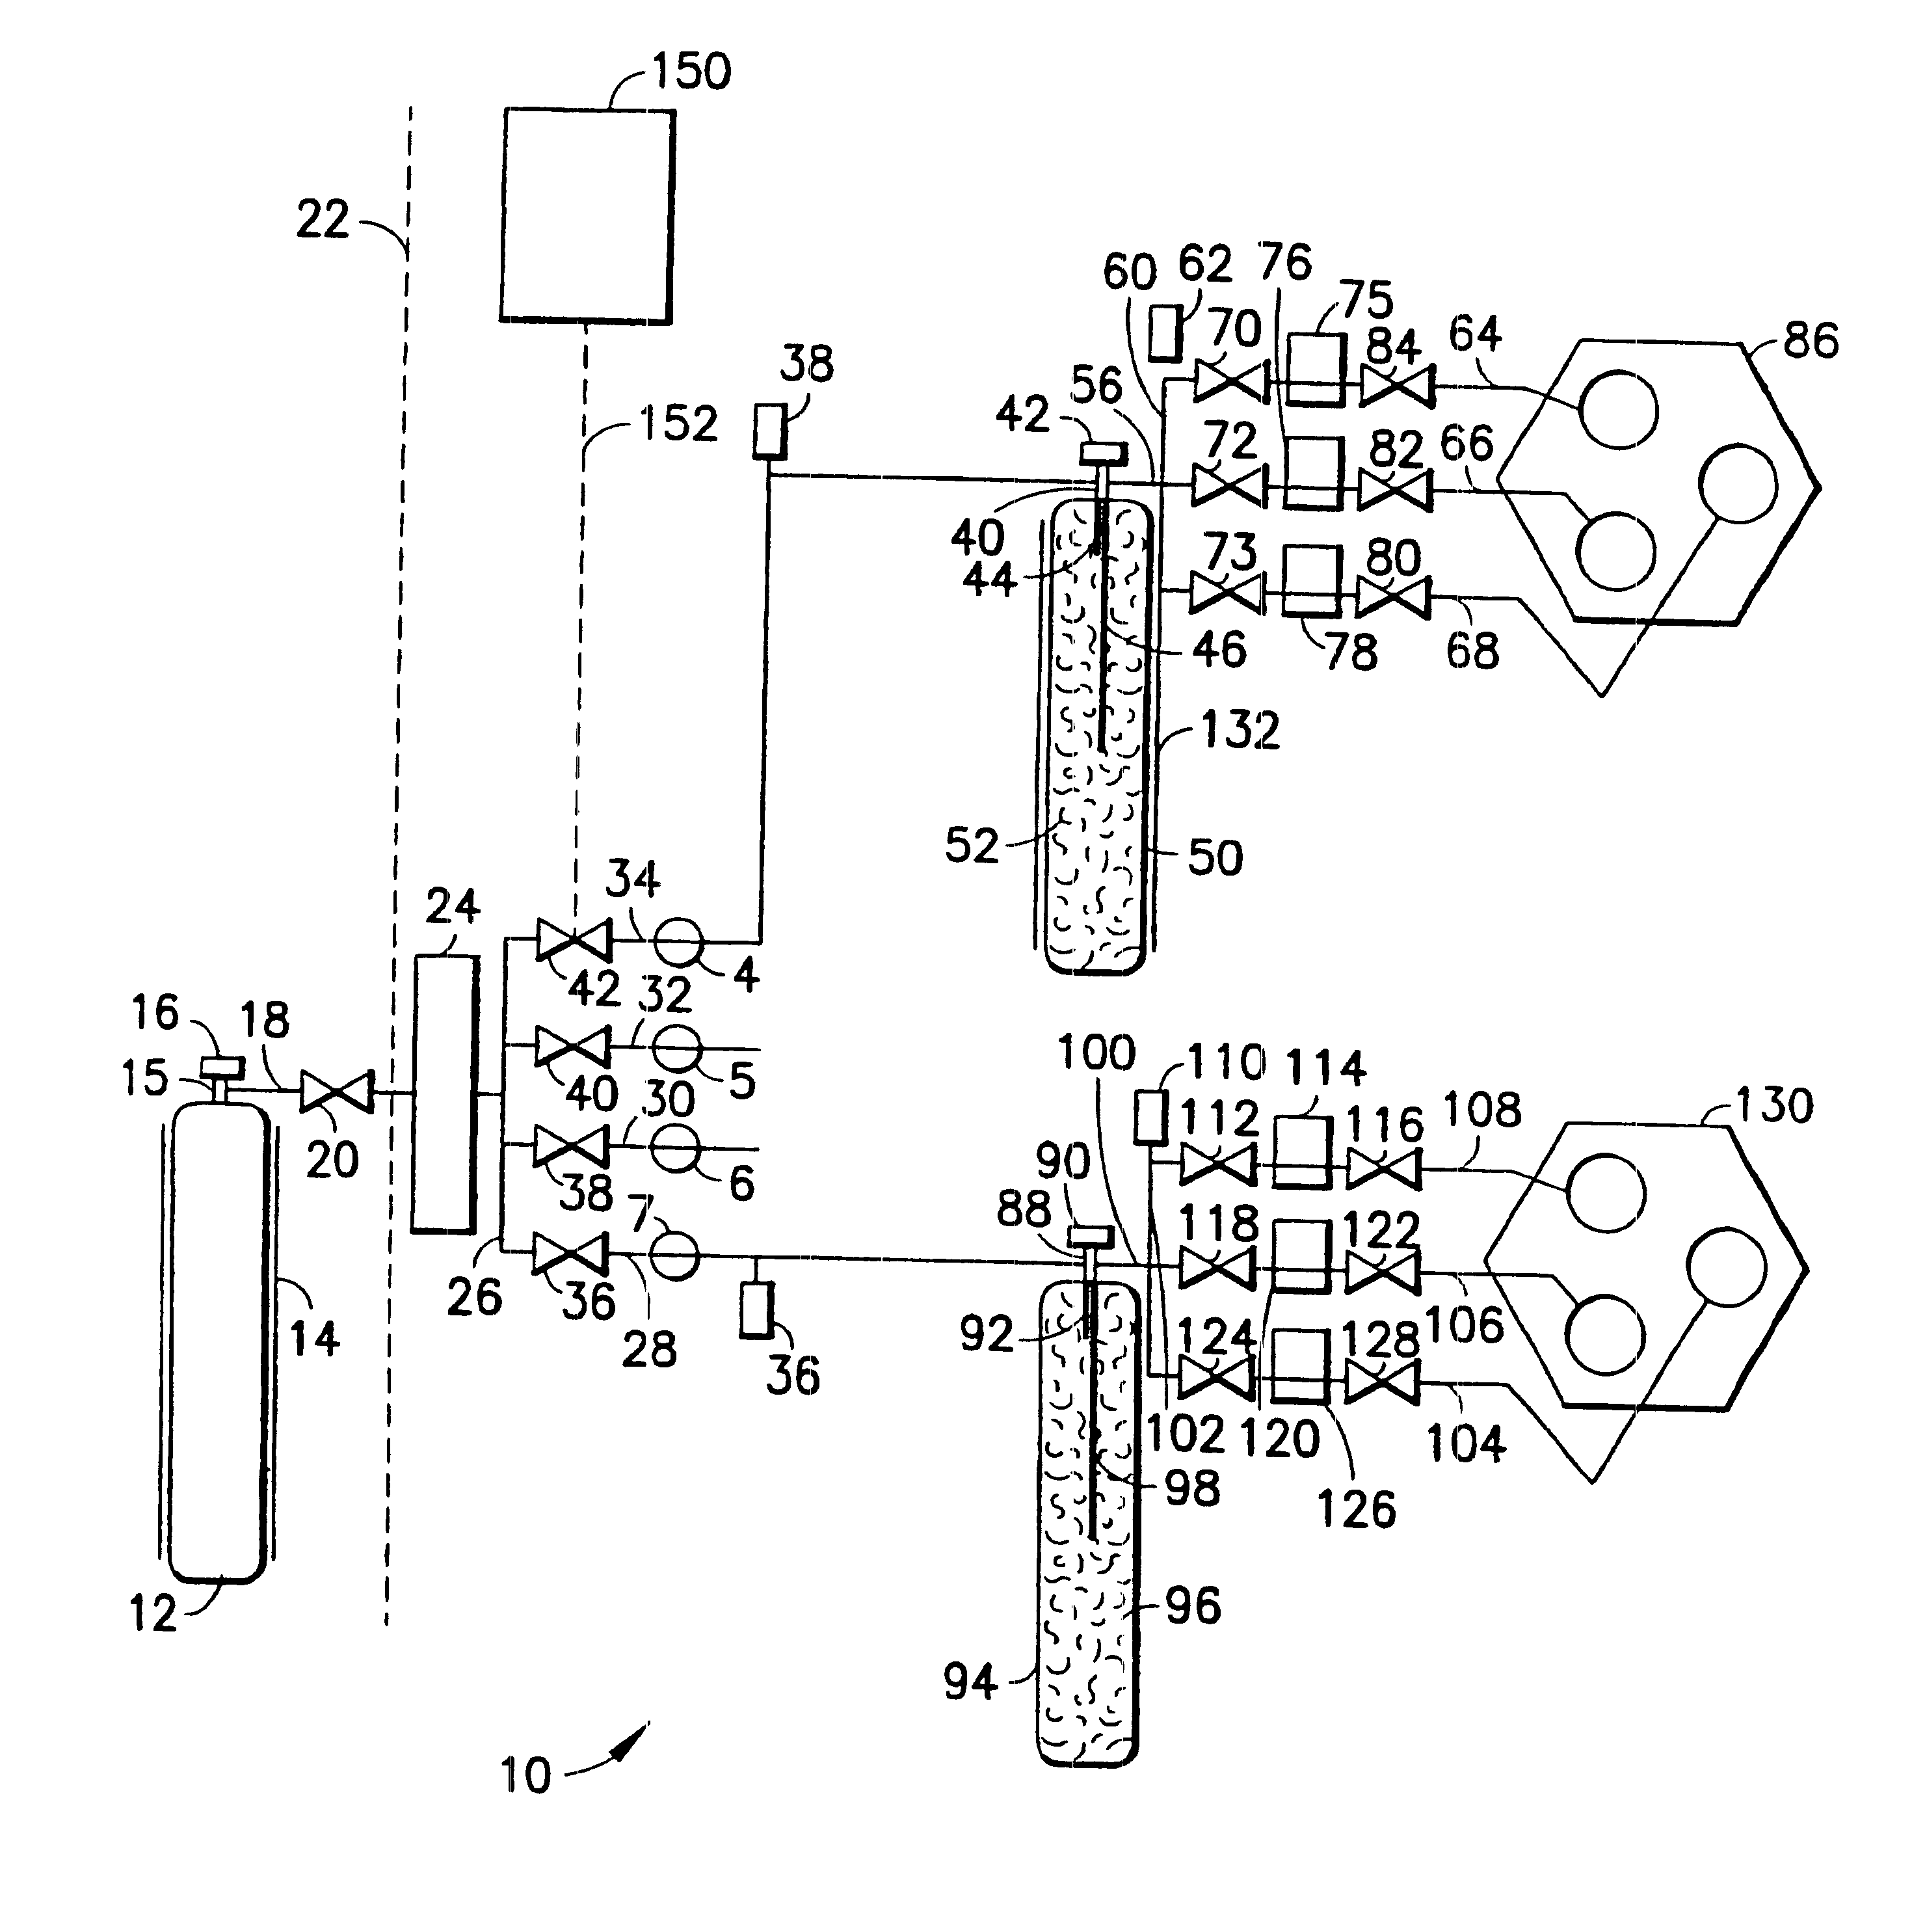 Fluid distribution system and process, and semiconductor fabrication facility utilizing same